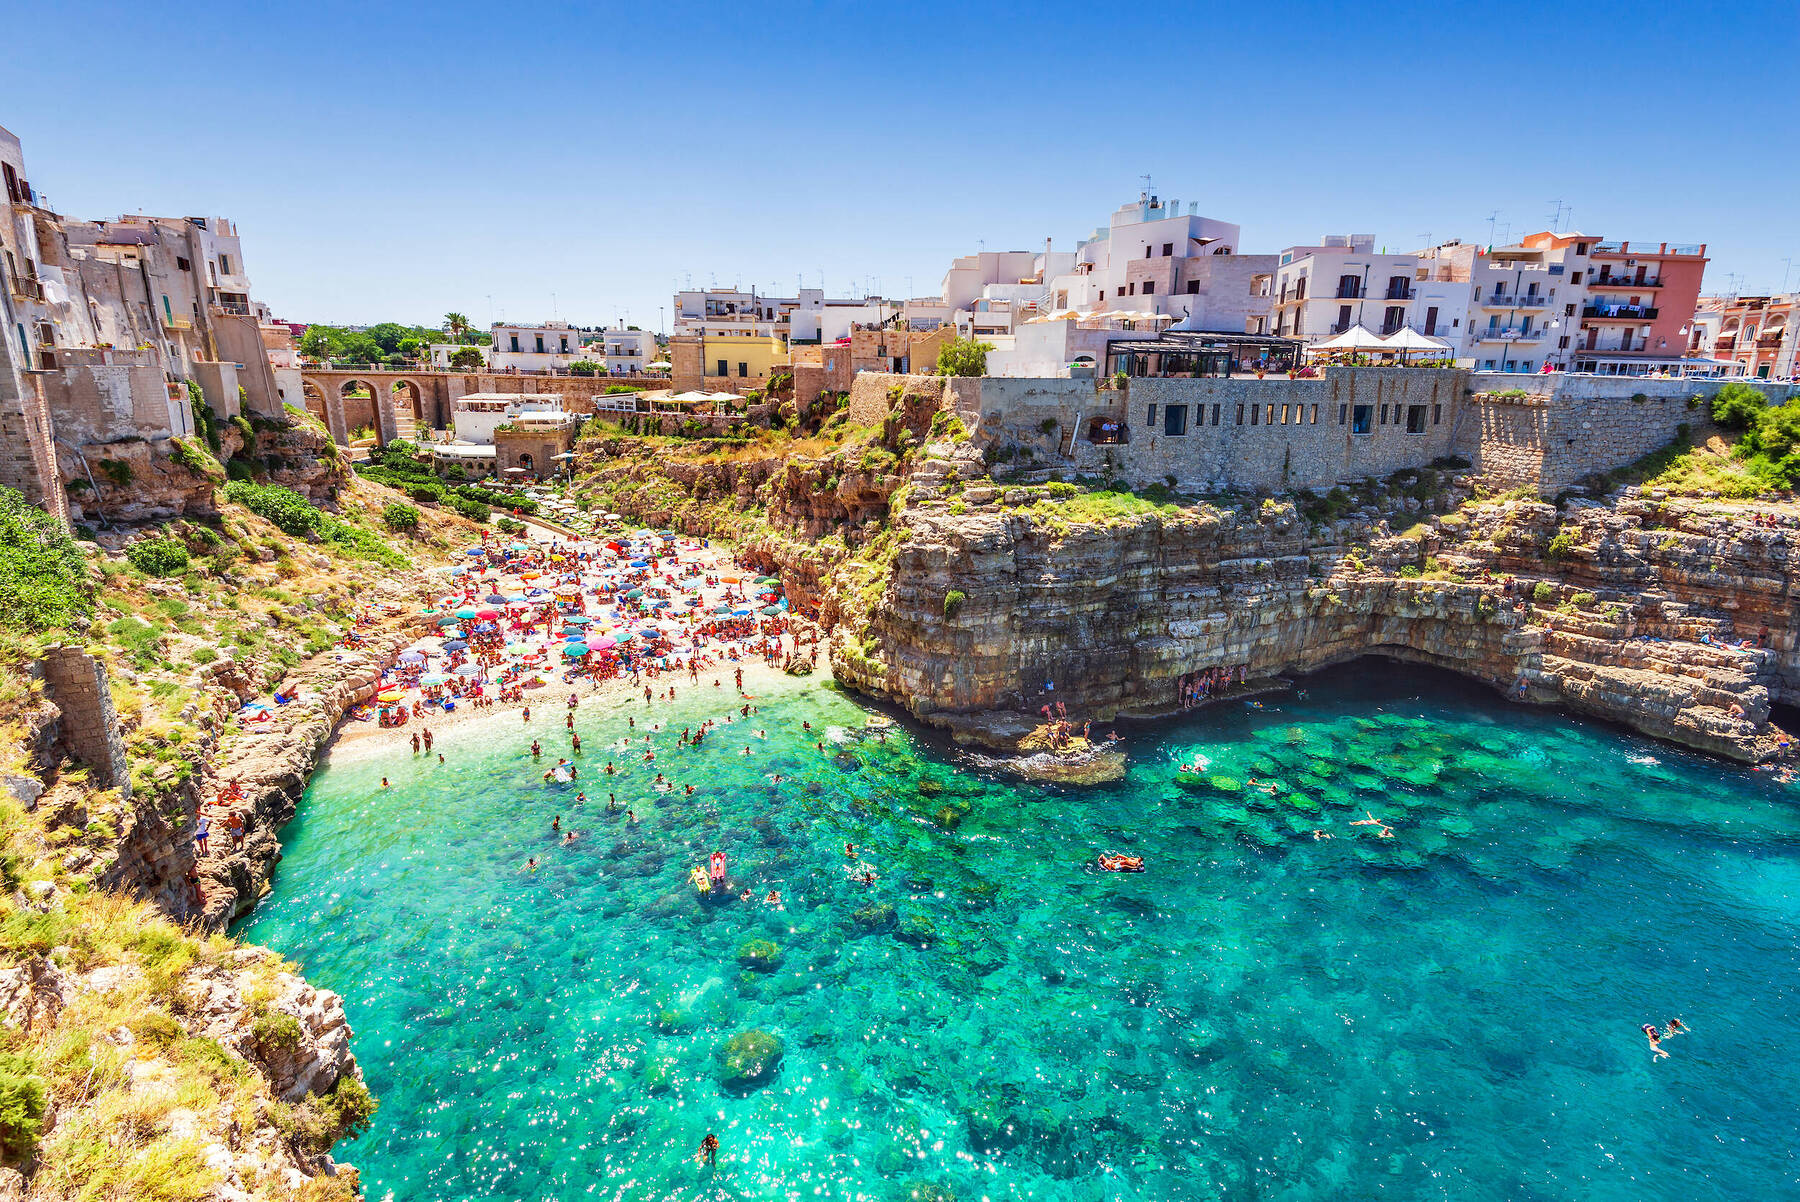 The Most Beautiful Places to Visit in Puglia - ASMALLWORLD